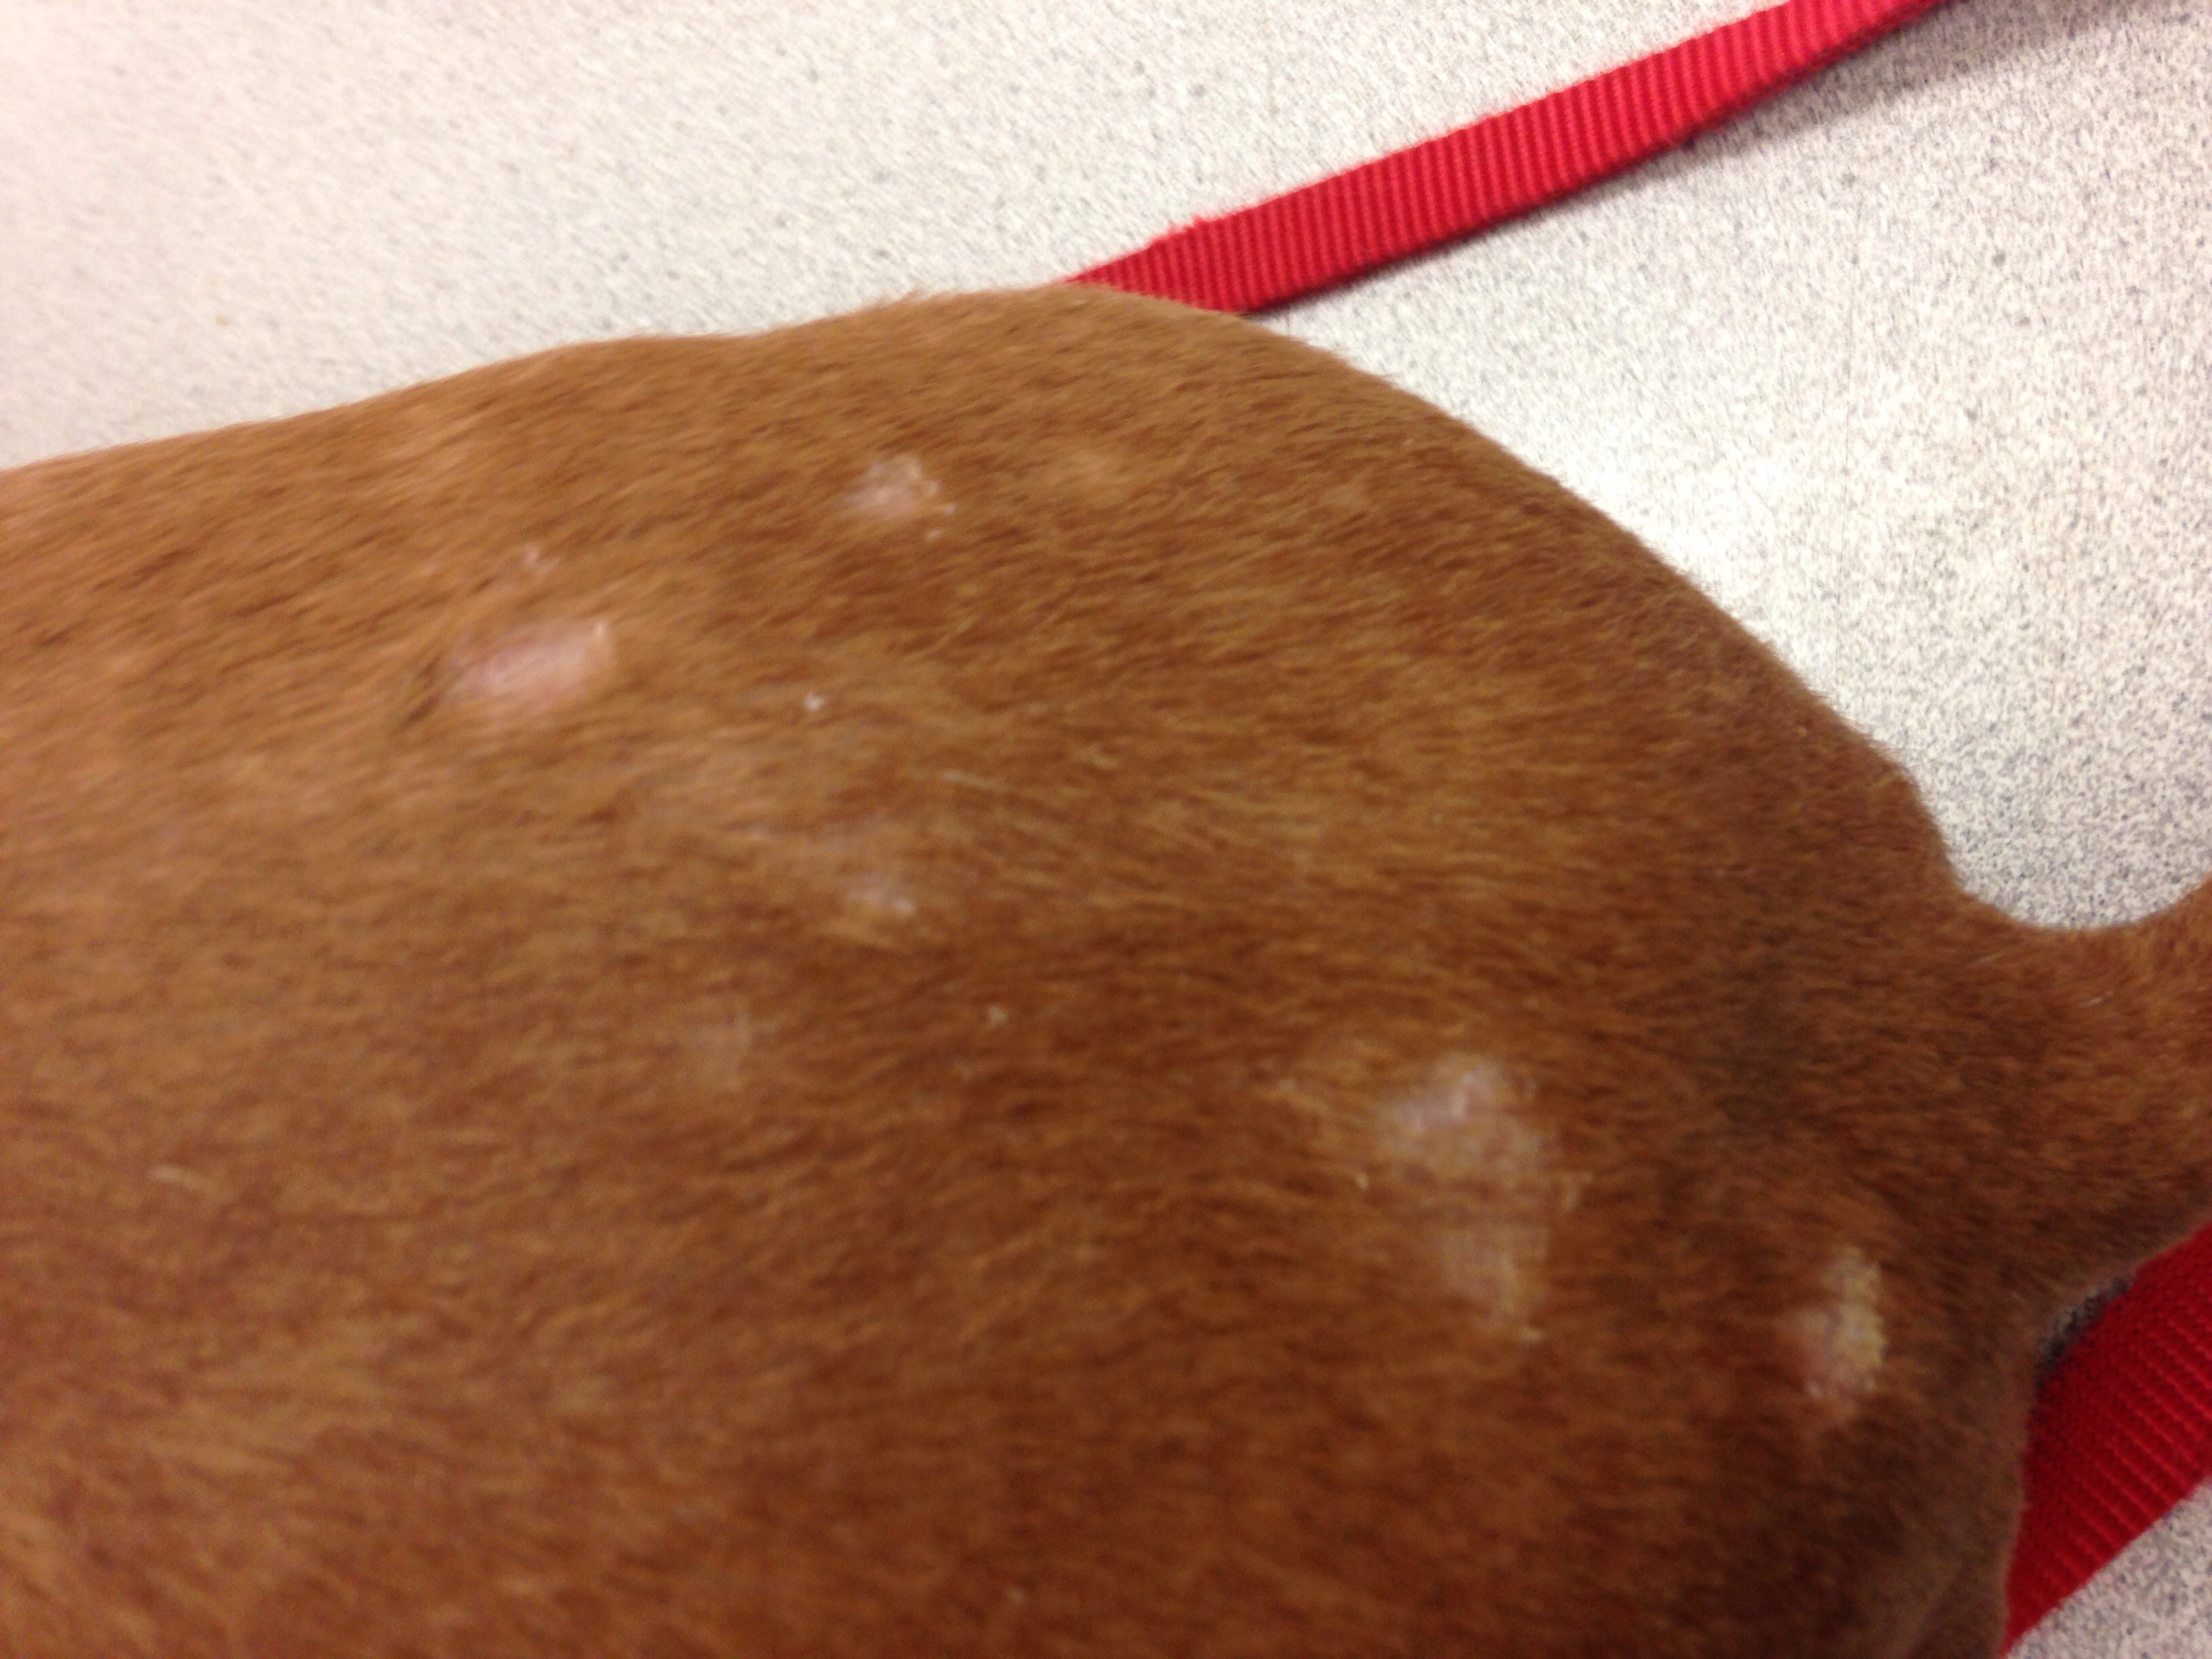 What Causes Dry Skin And Hair Loss In Dogs